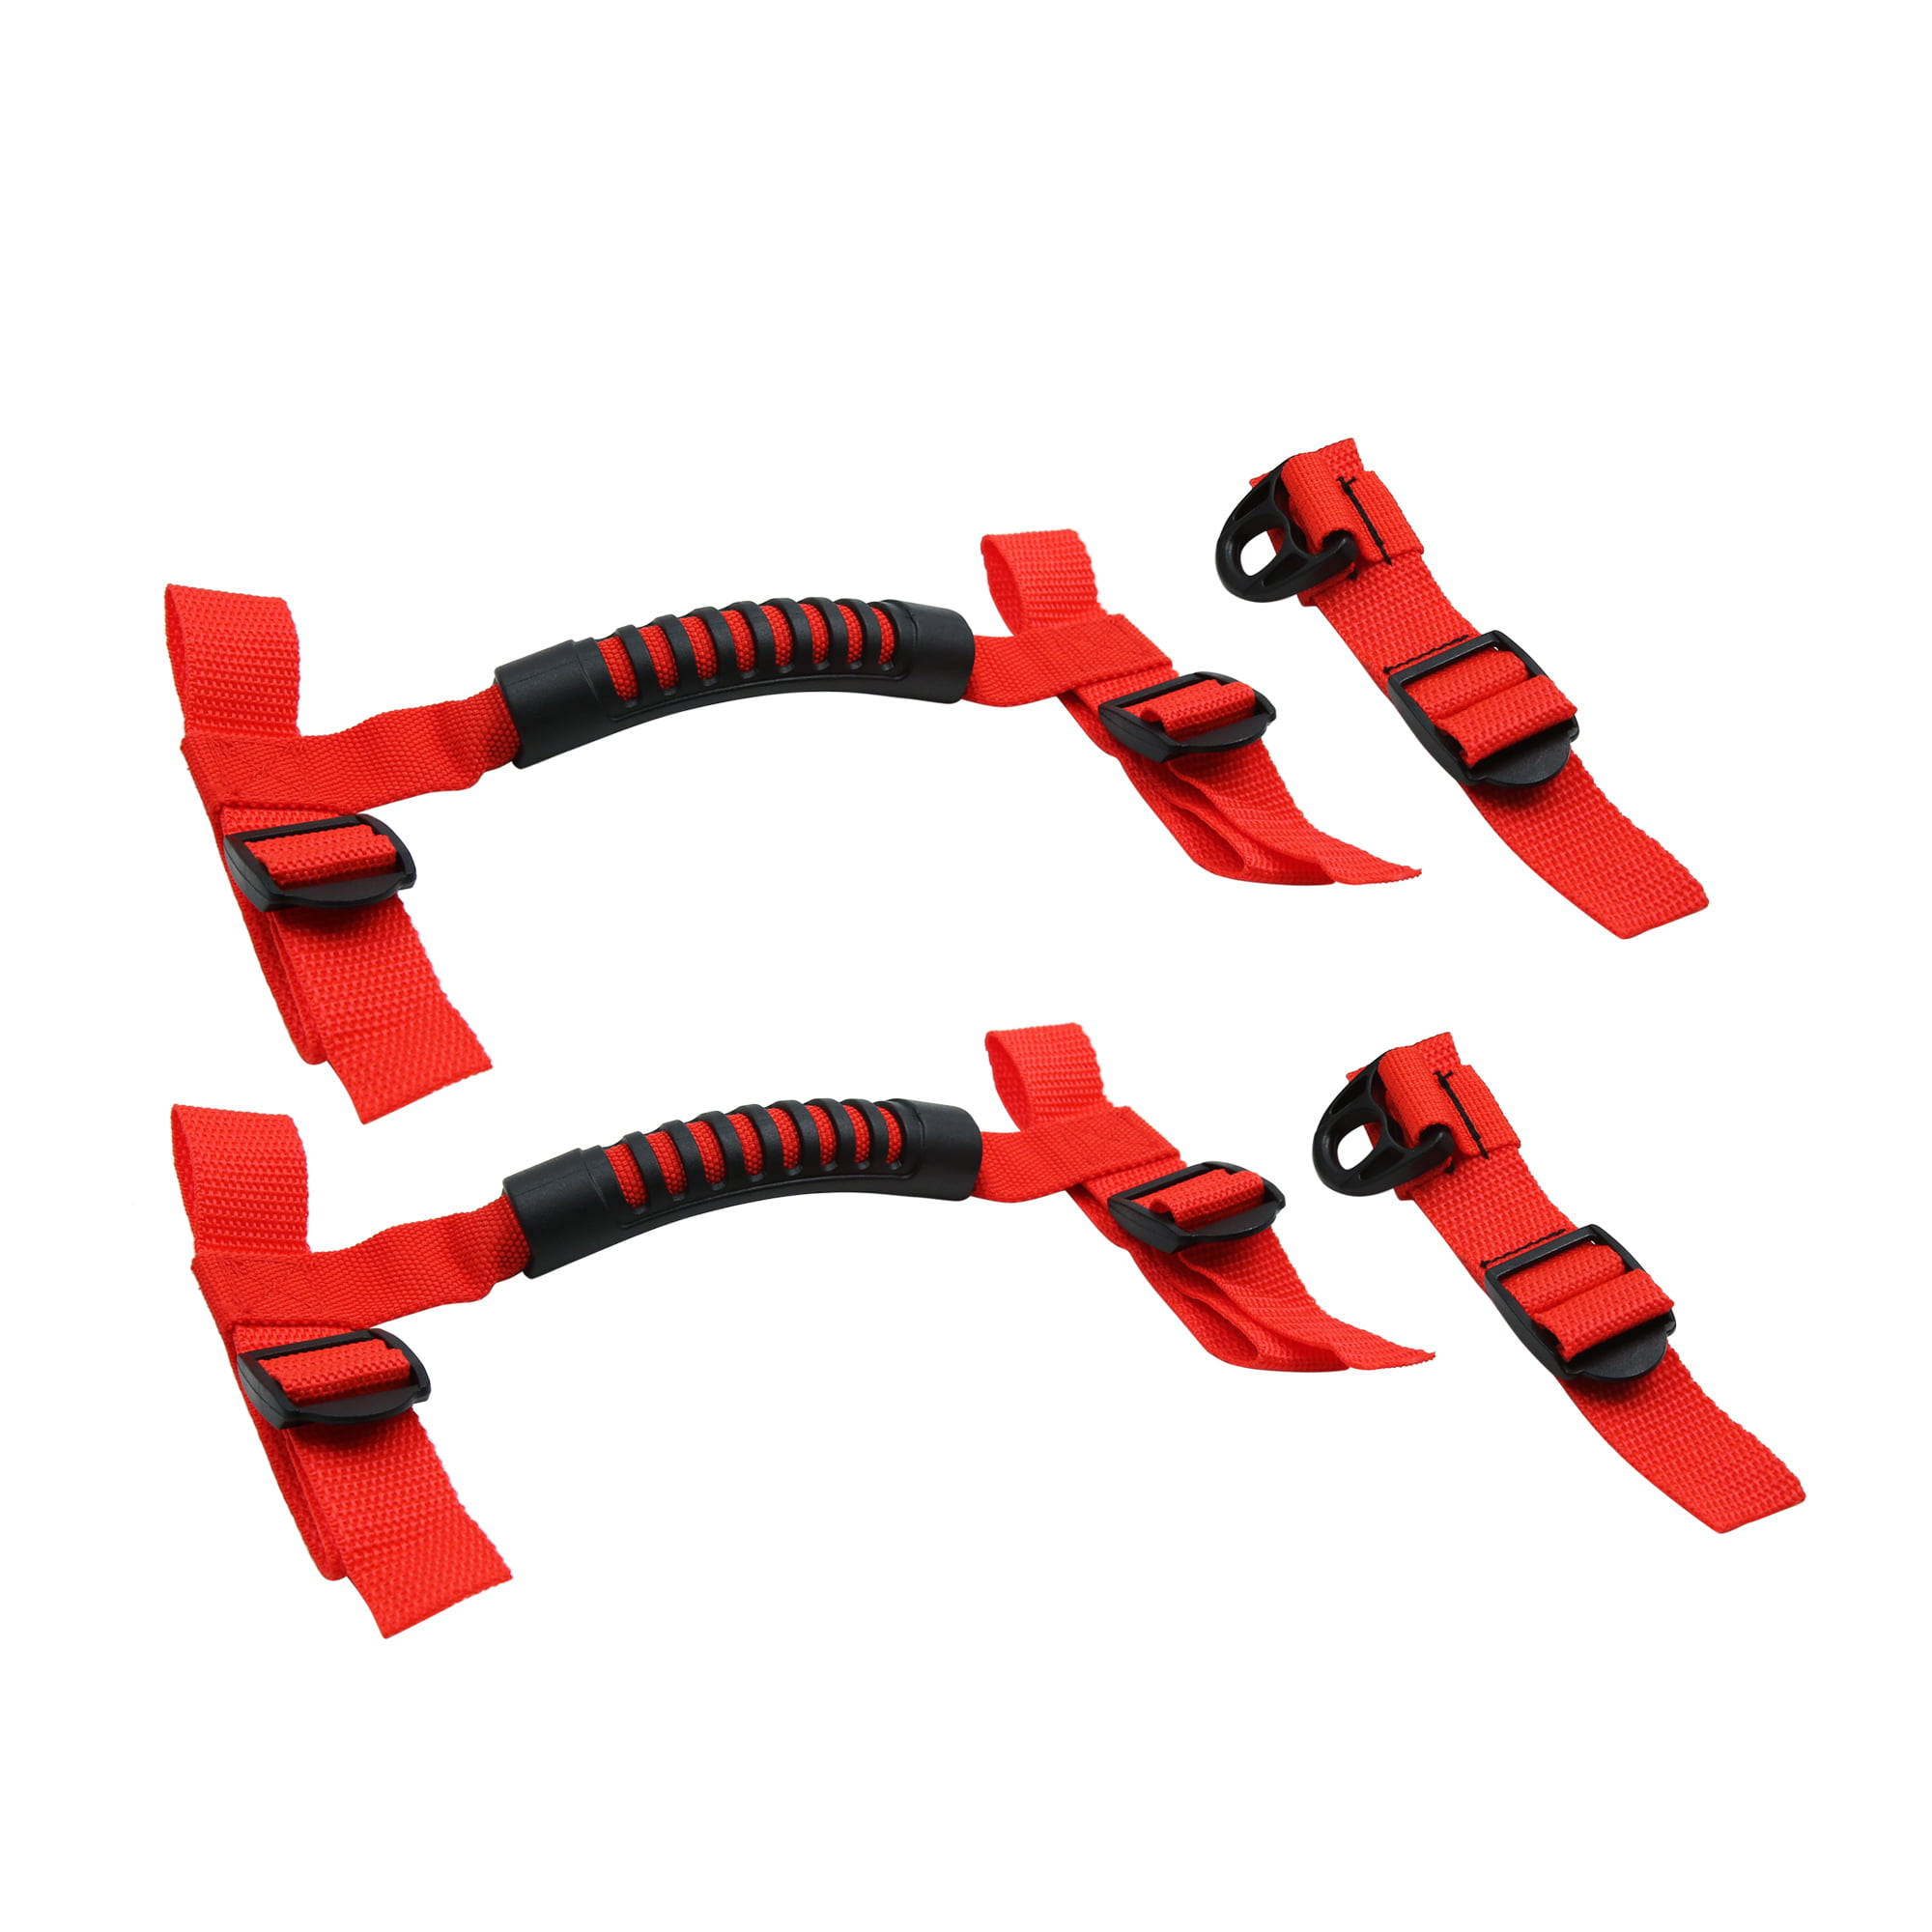 2 Set Red Car Roll Bar Grab Handle Handrail with Buckle for Jeep Wrangler - Walmart.com